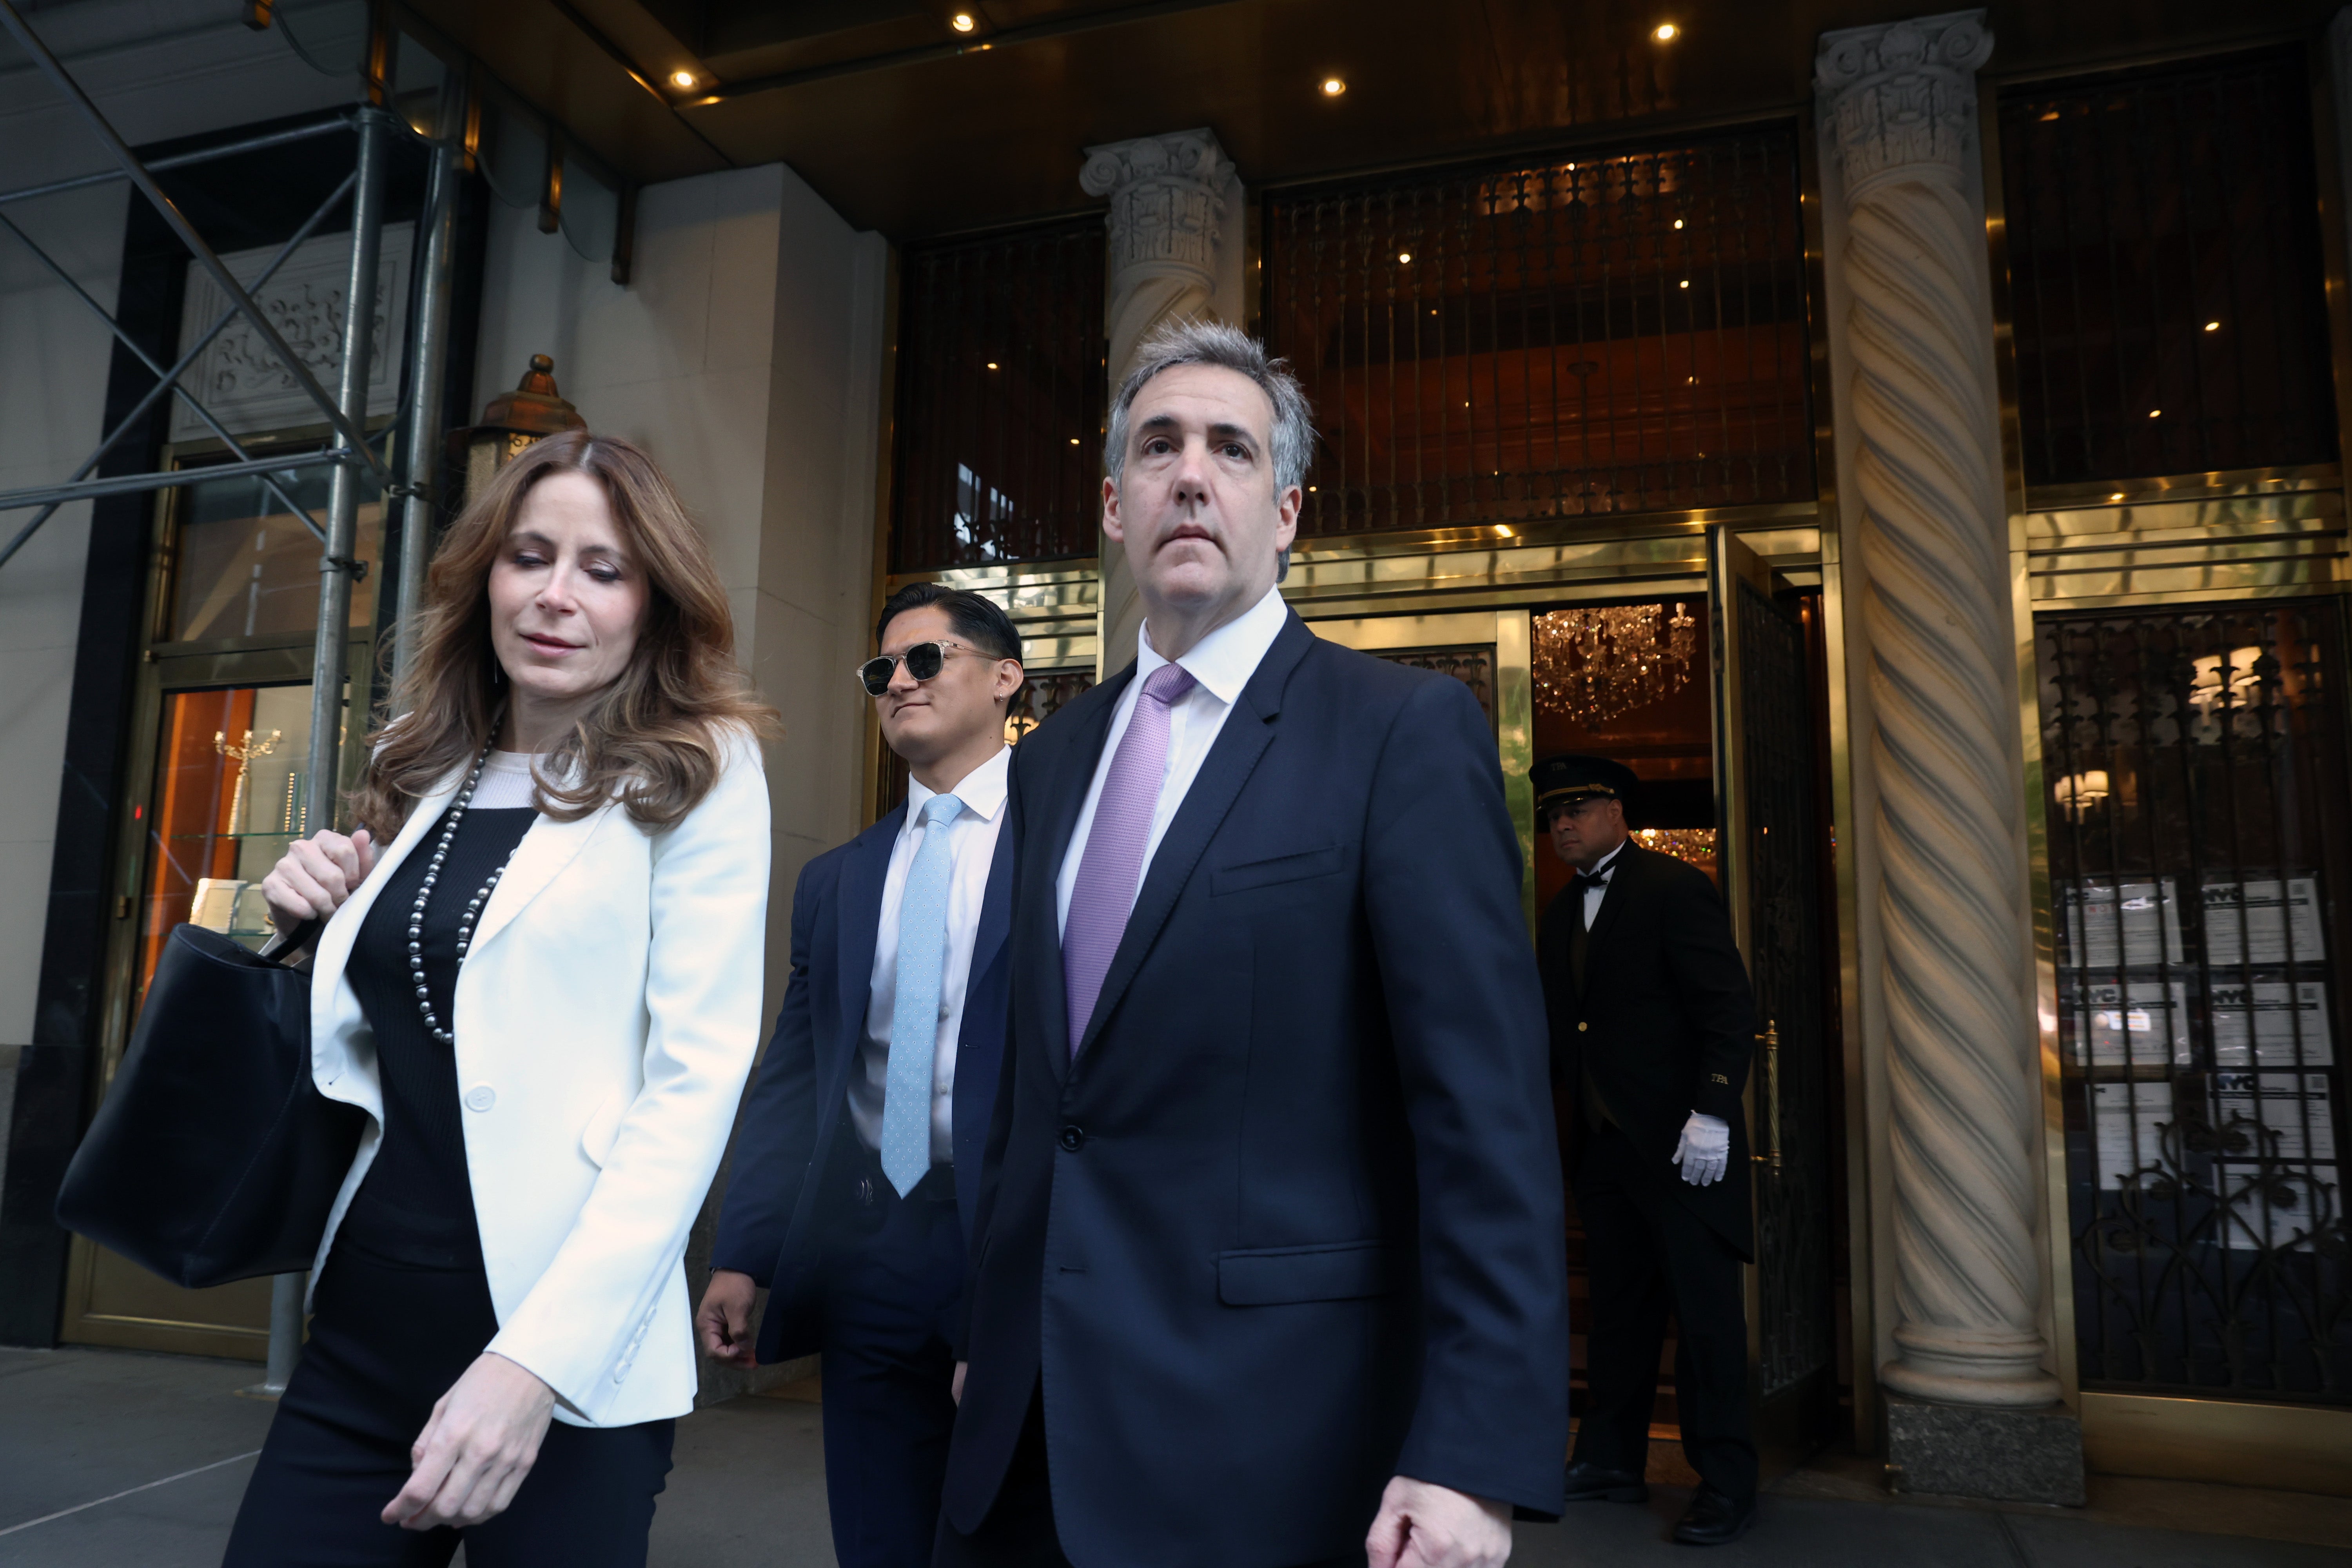 Michael Cohen departs his apartment to testify at Donald Trump’s hush money trial on 20 May